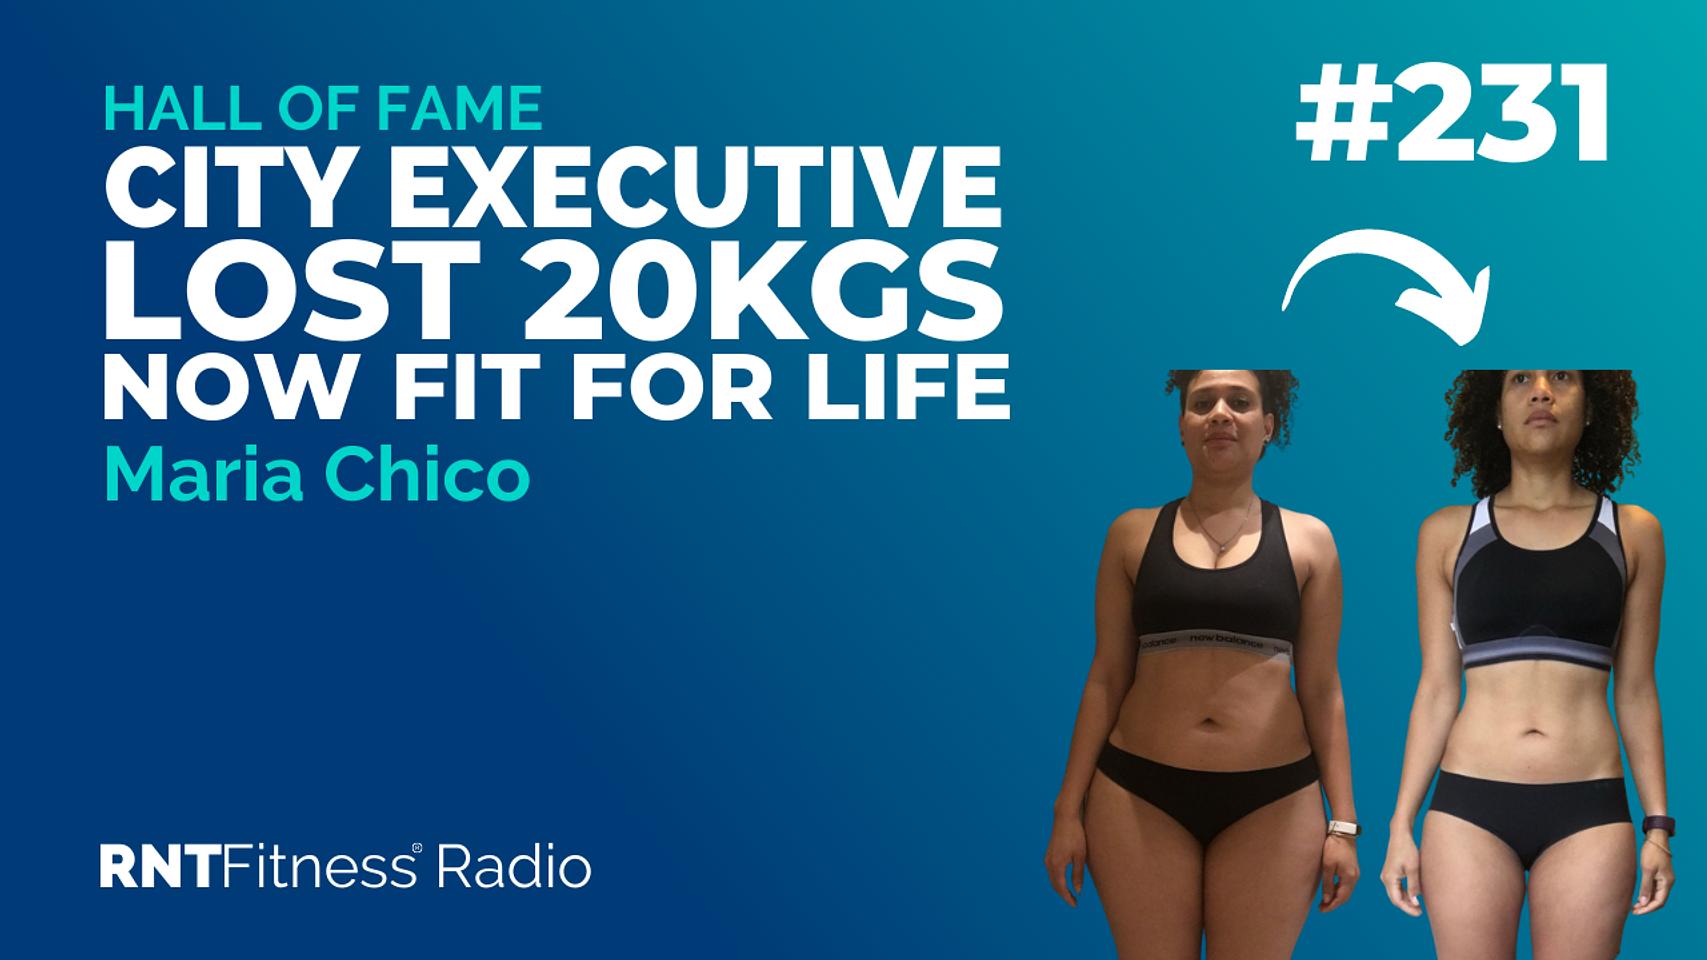 Ep. 231 - Hall of Fame | Maria Chico - Successful City Executive Stopped Yo-Yoing, Lost 20kgs And Now Fit For Life!